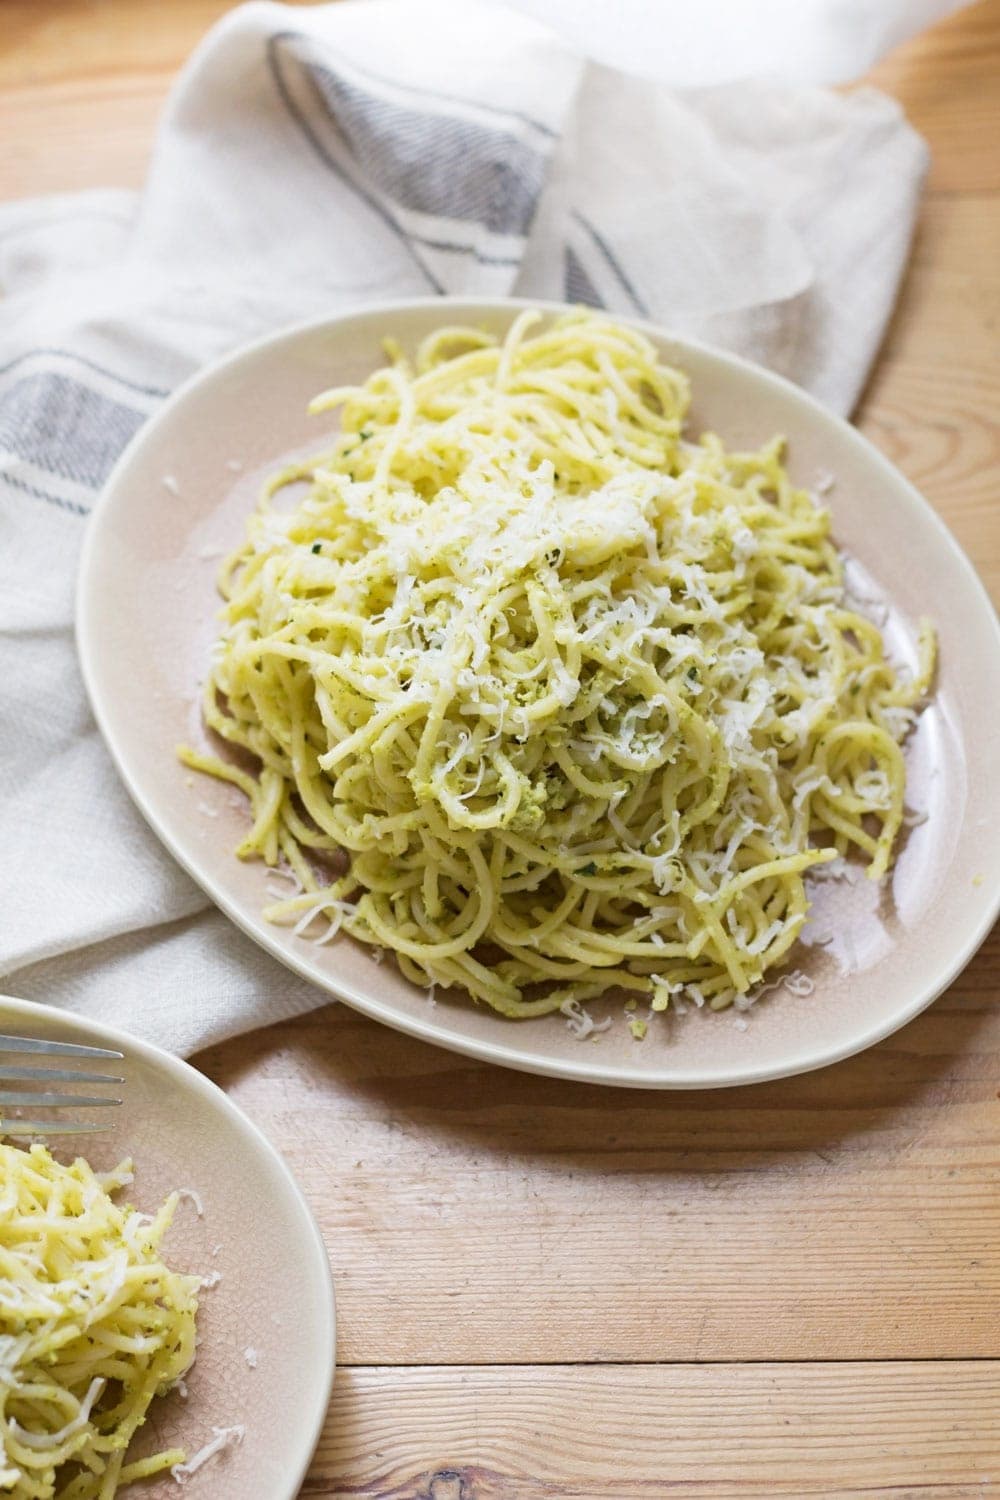 This quick and easy broccoli pesto is a fun twist on a classic pasta dish. Great for adding an extra vegetable to your dinner!